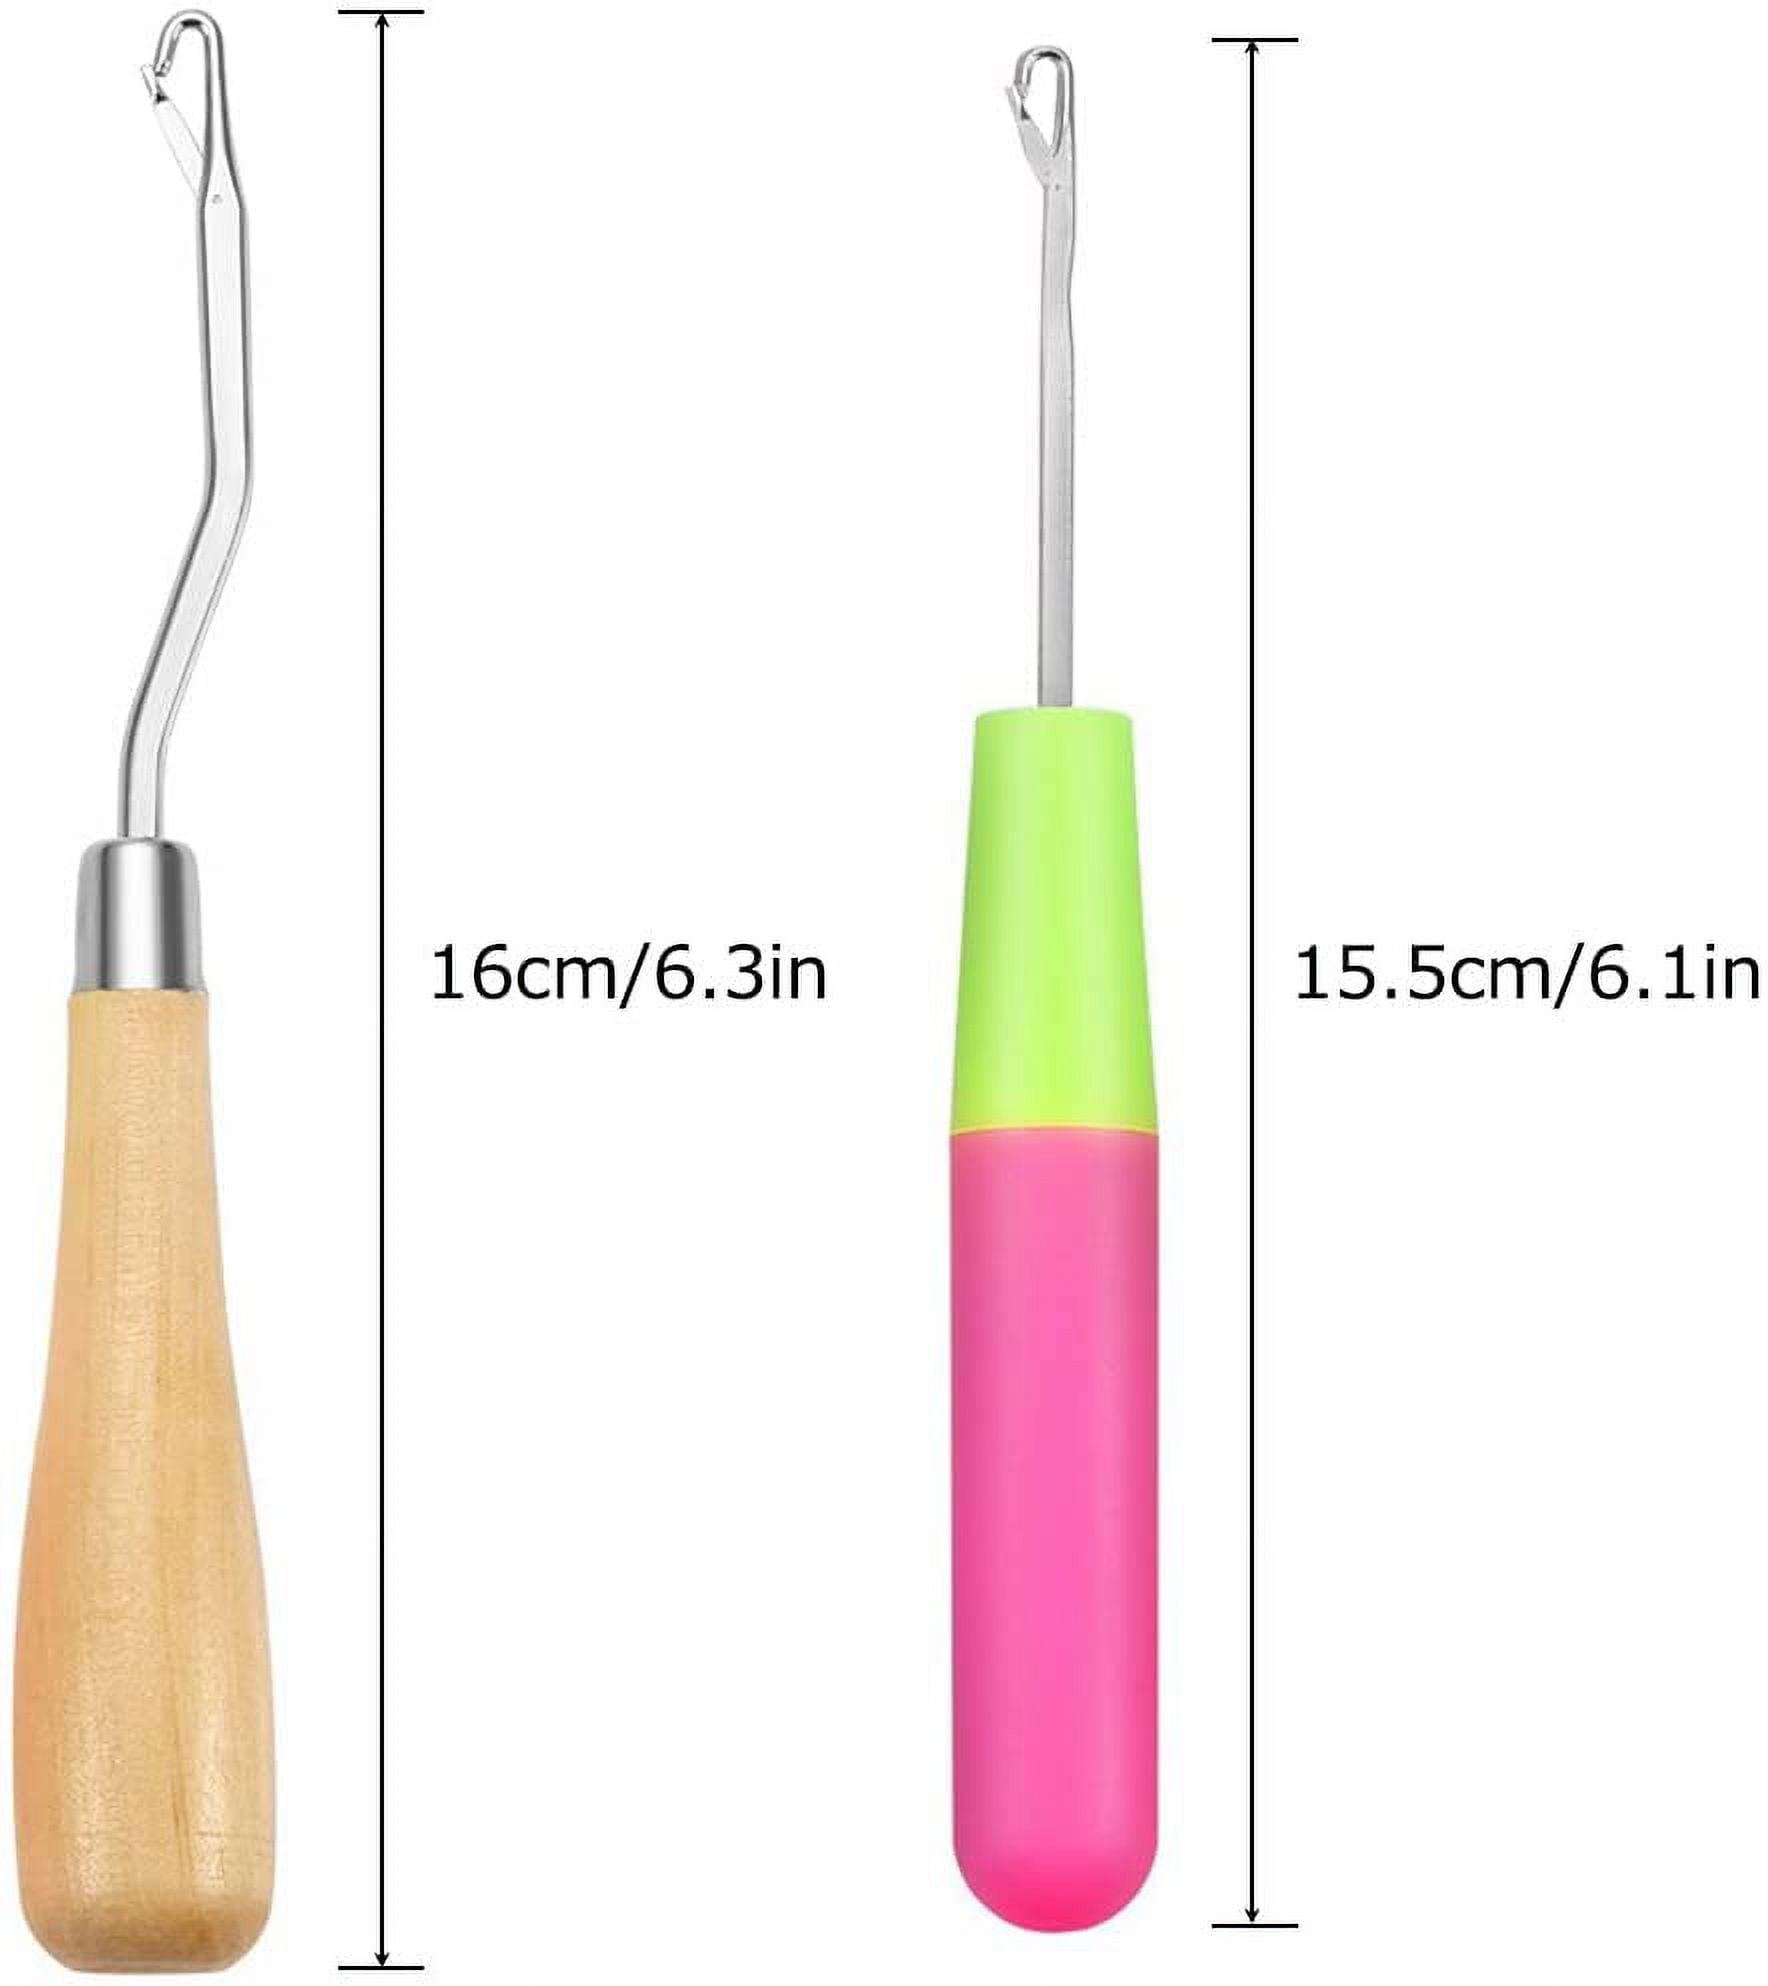 Laurel Hill Crochet Hooks Micro Ring Hair Extension Wooden Pulling Needle  Threader Feather Hook Tool For Hair Extensions From Harmonywigs, $1.34